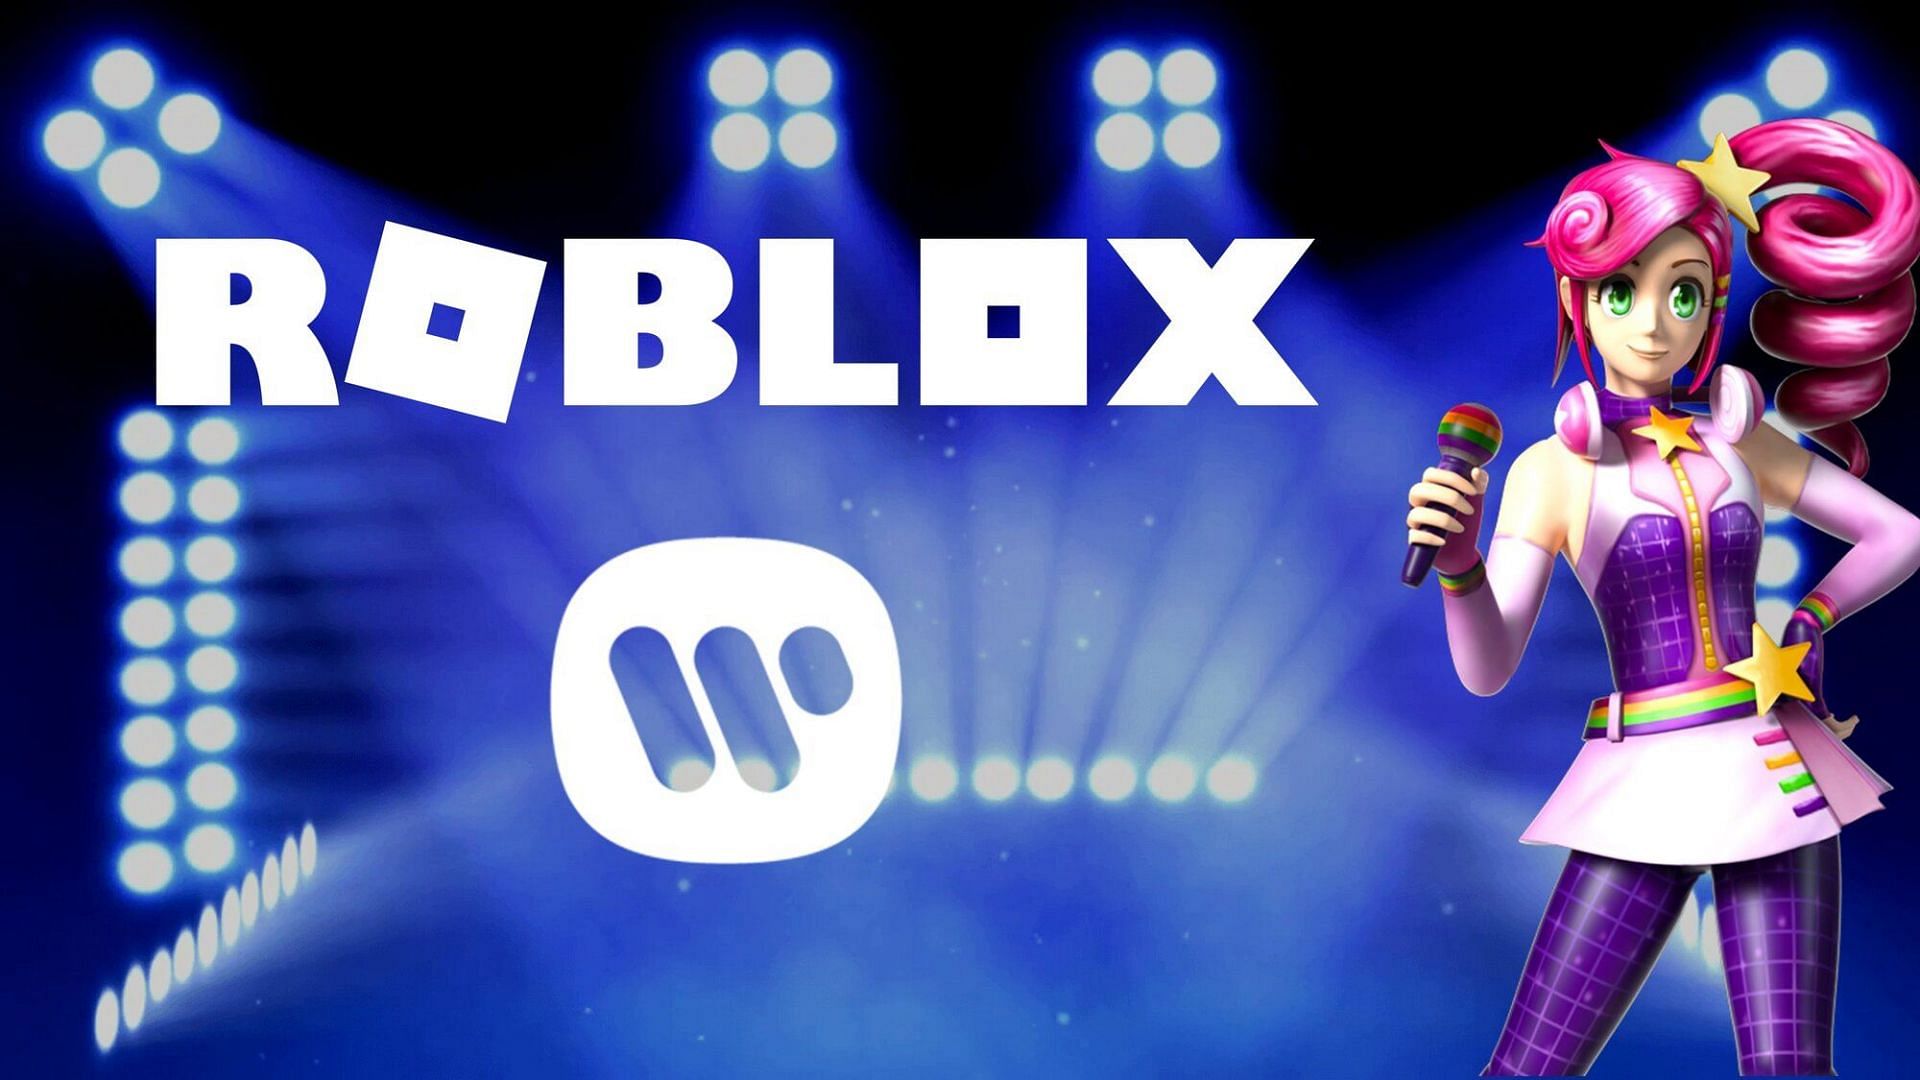 Concerts by biggest artists on Roblox (Image via Roblox)